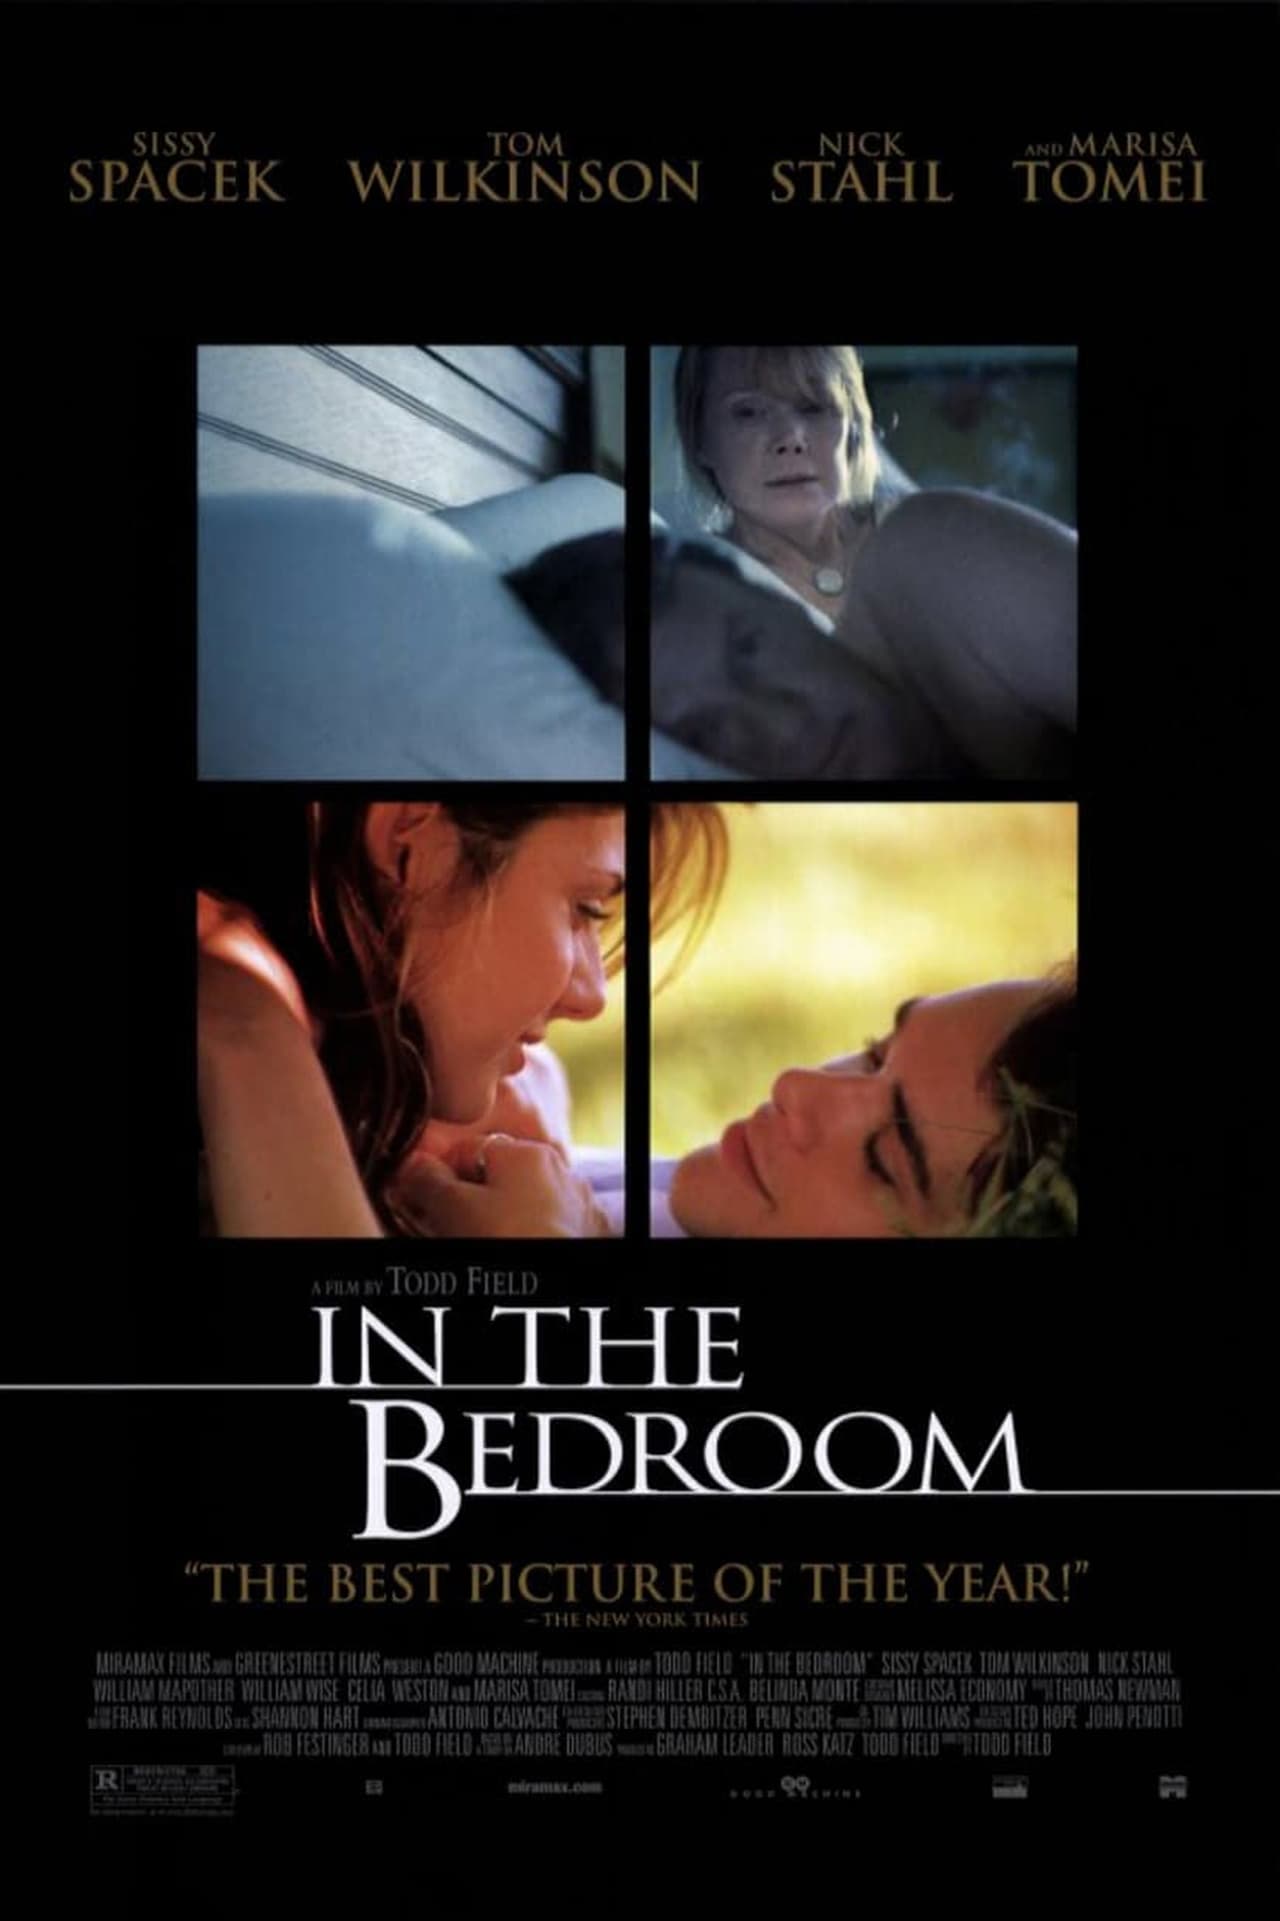 The room poster. In the Bedroom 2001. In the Bedroom Постер 2001.